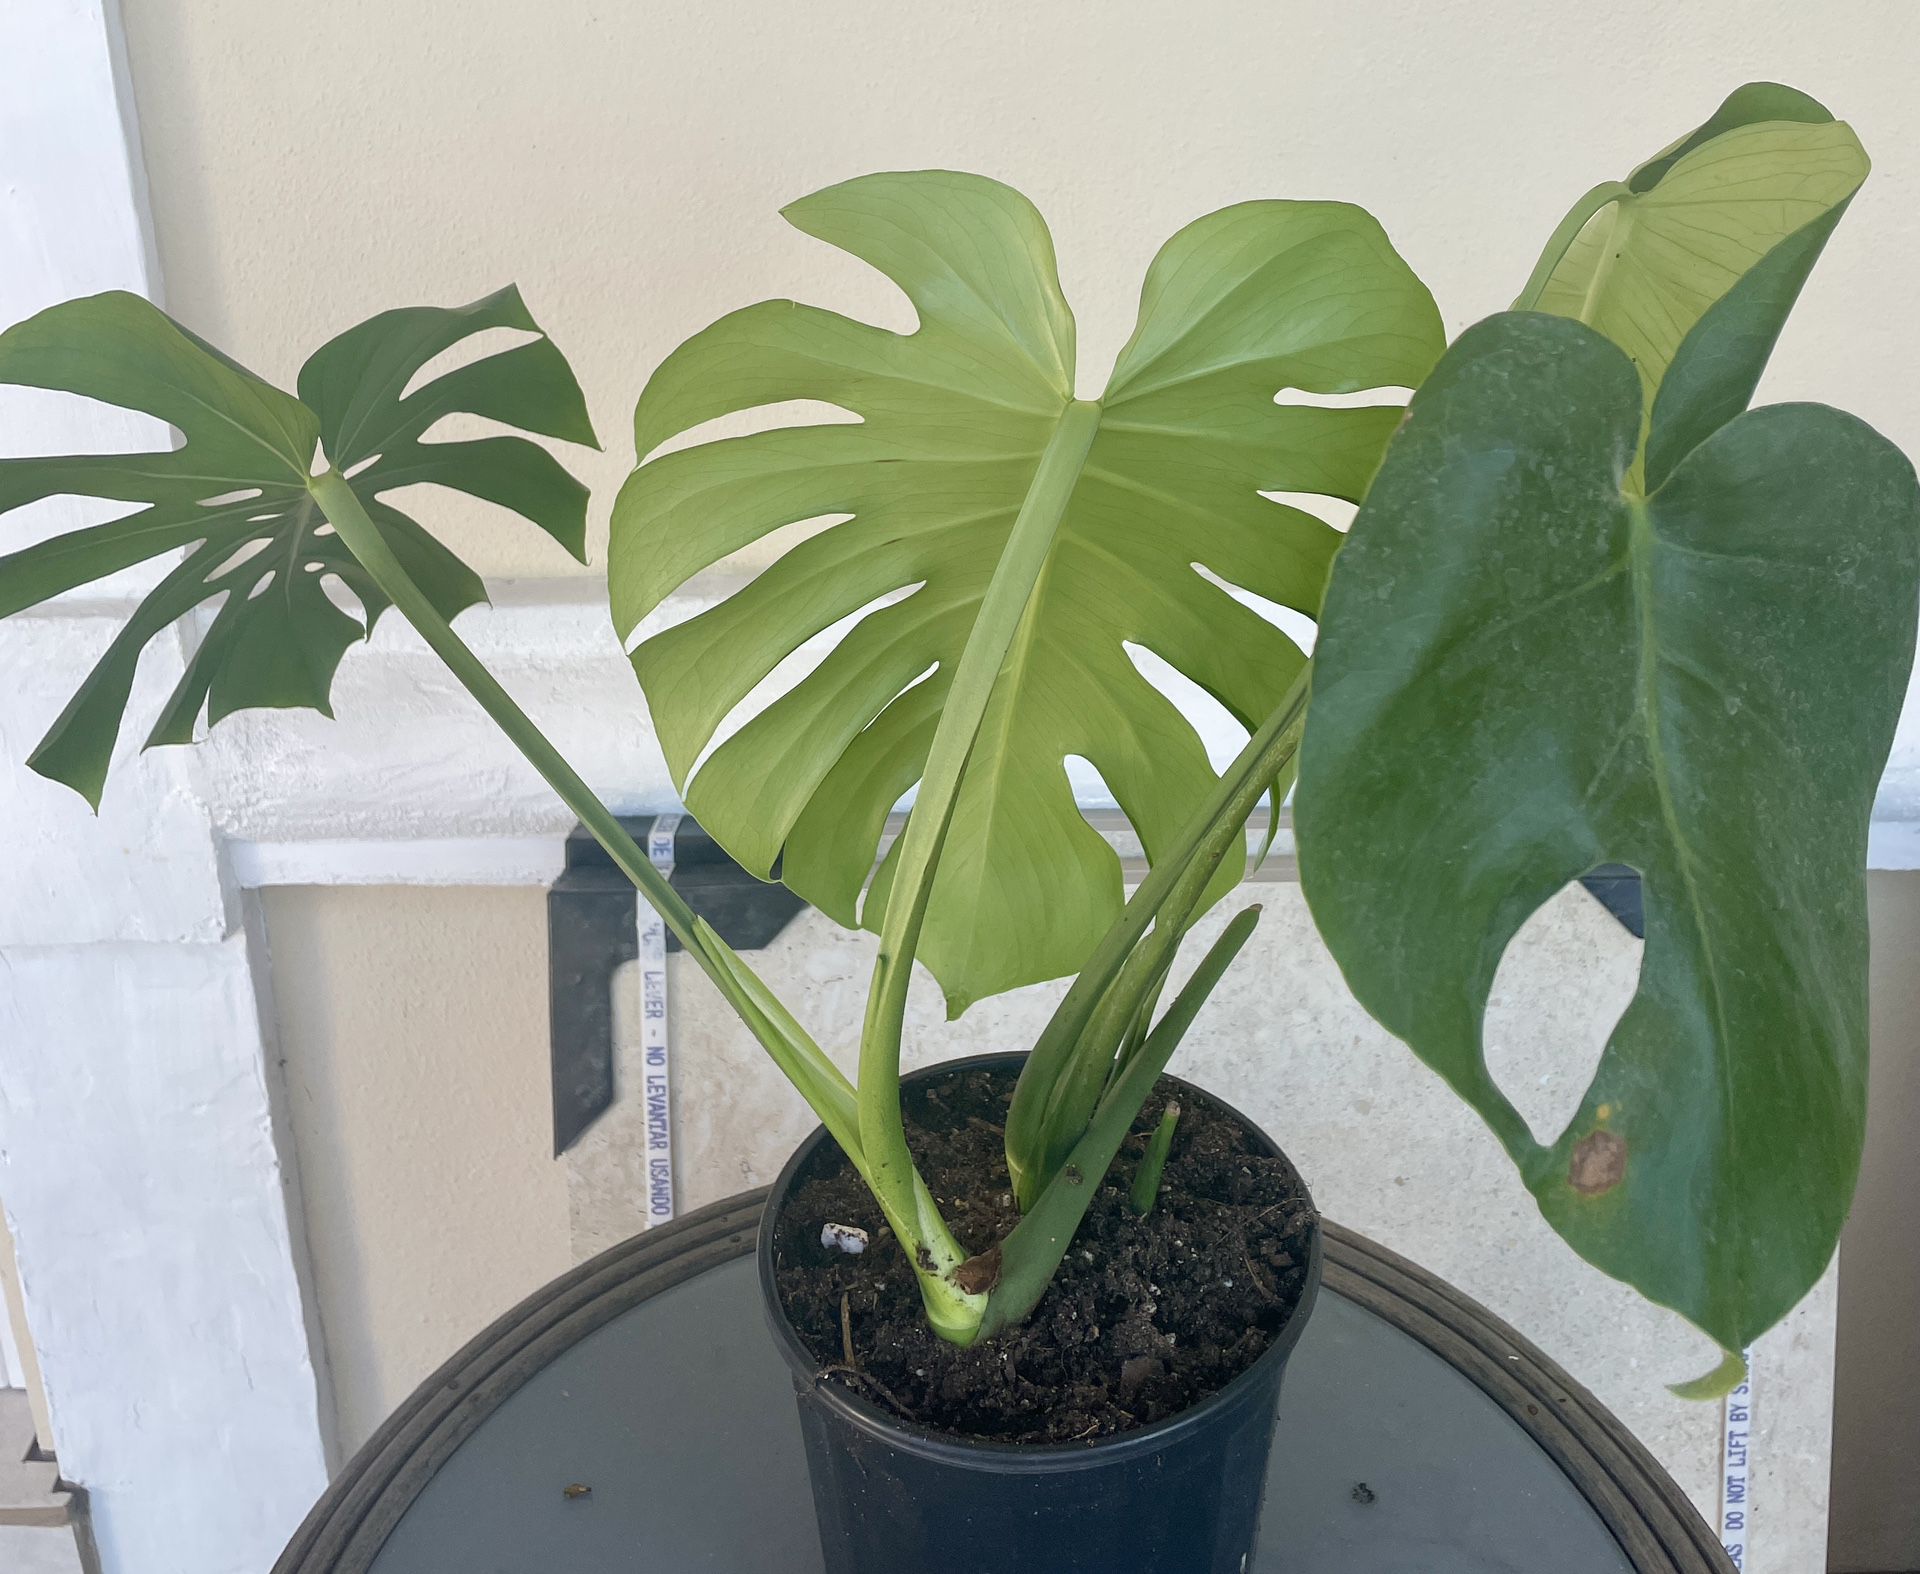 Monstera Deliciosa Swiss Cheese Plant Rooted In 6.5” Pot Tag #106